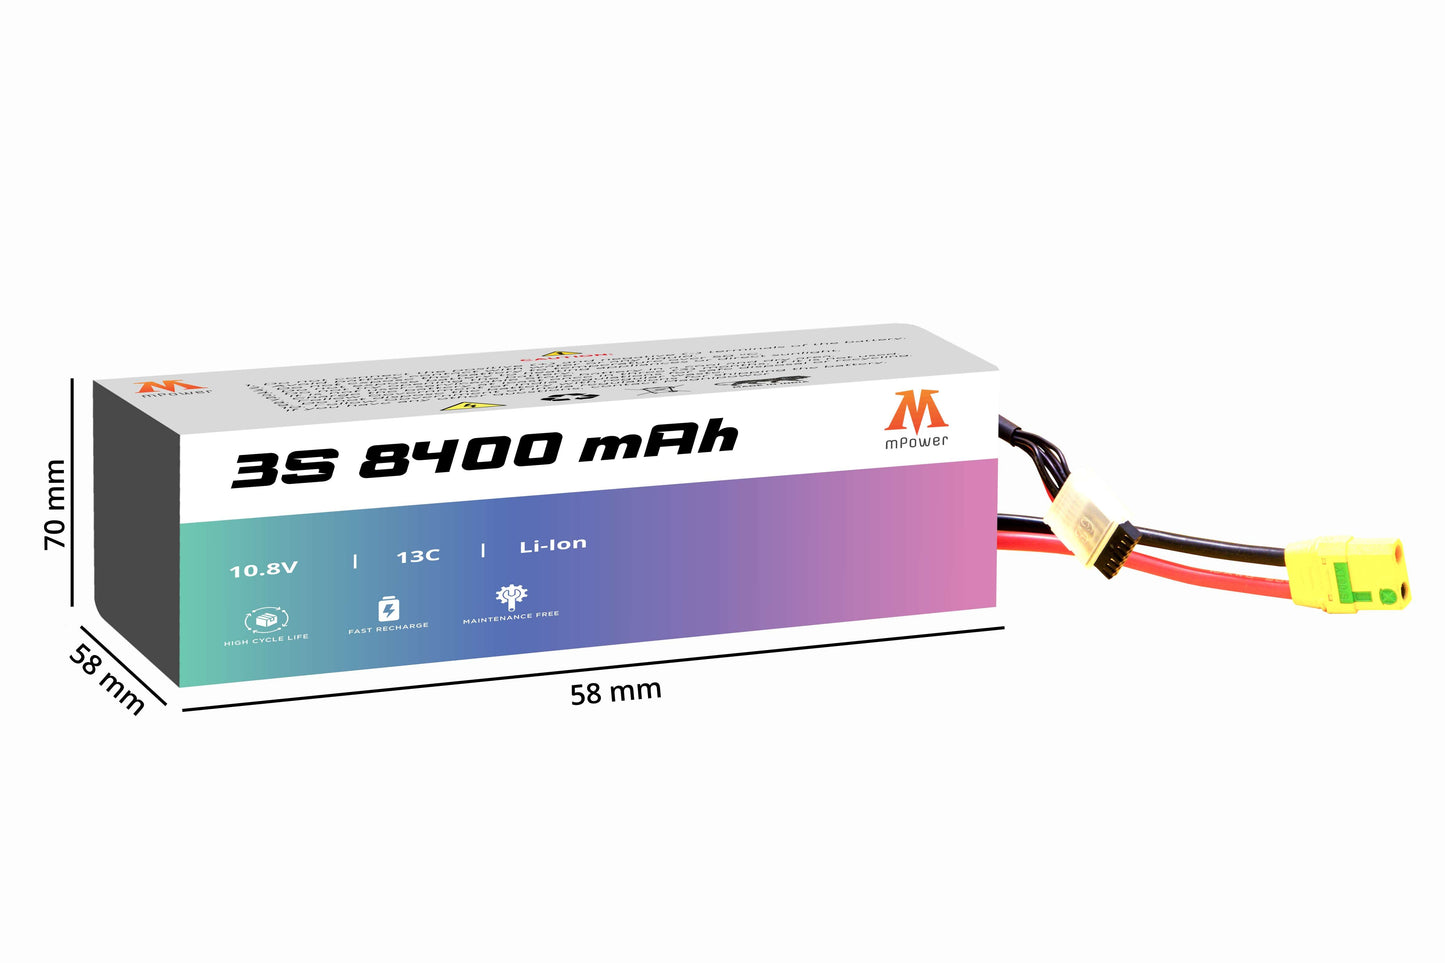 mPower 3S 8400mAh 13C Lithium-Ion Battery for Surveillance Drones